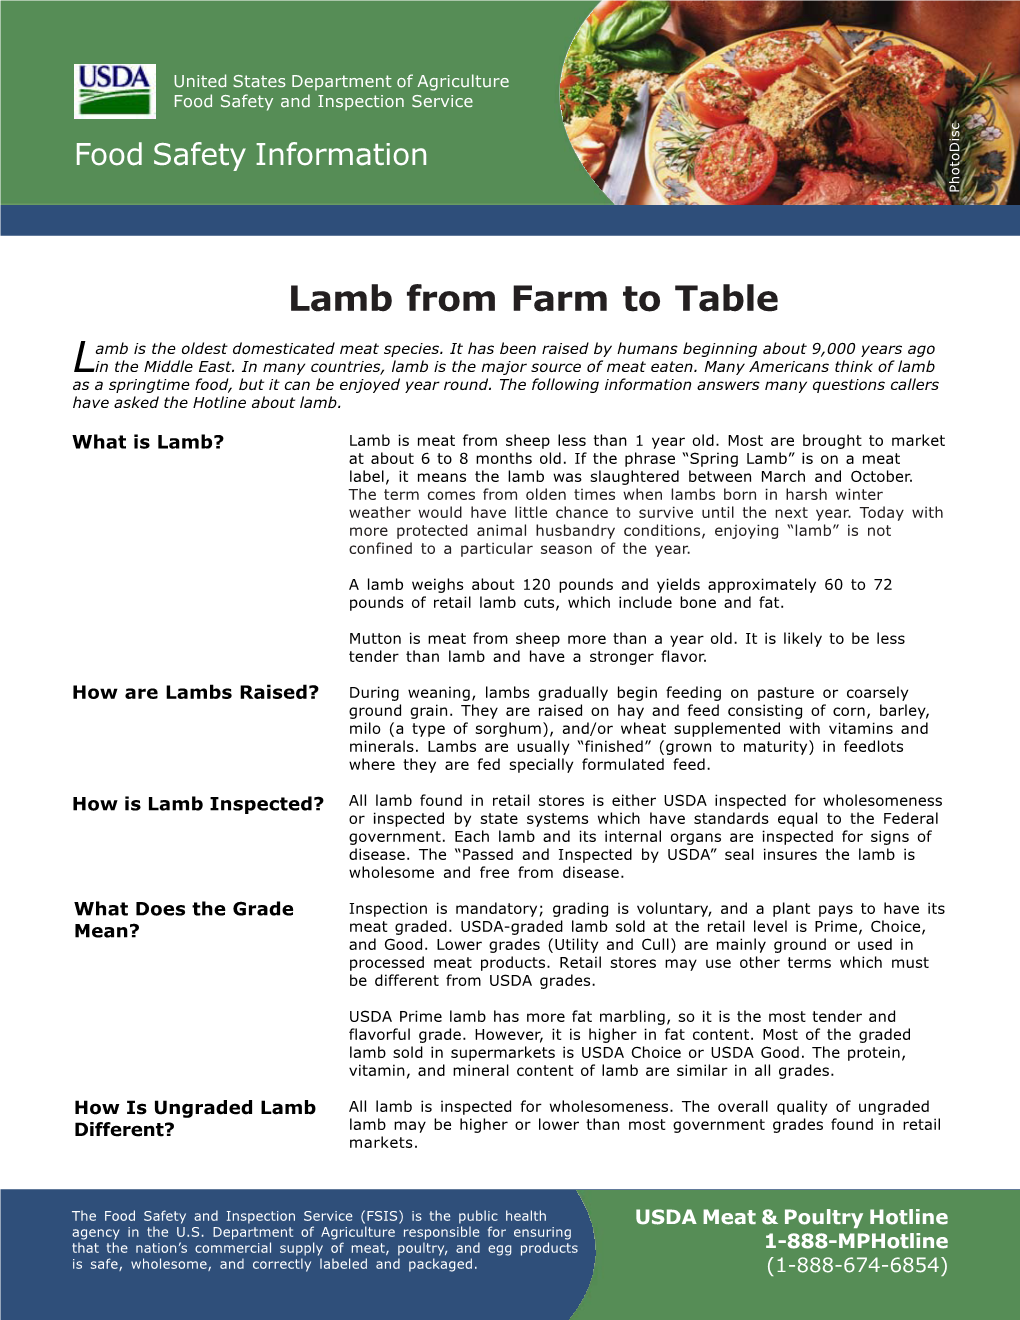 Lamb from Farm to Table